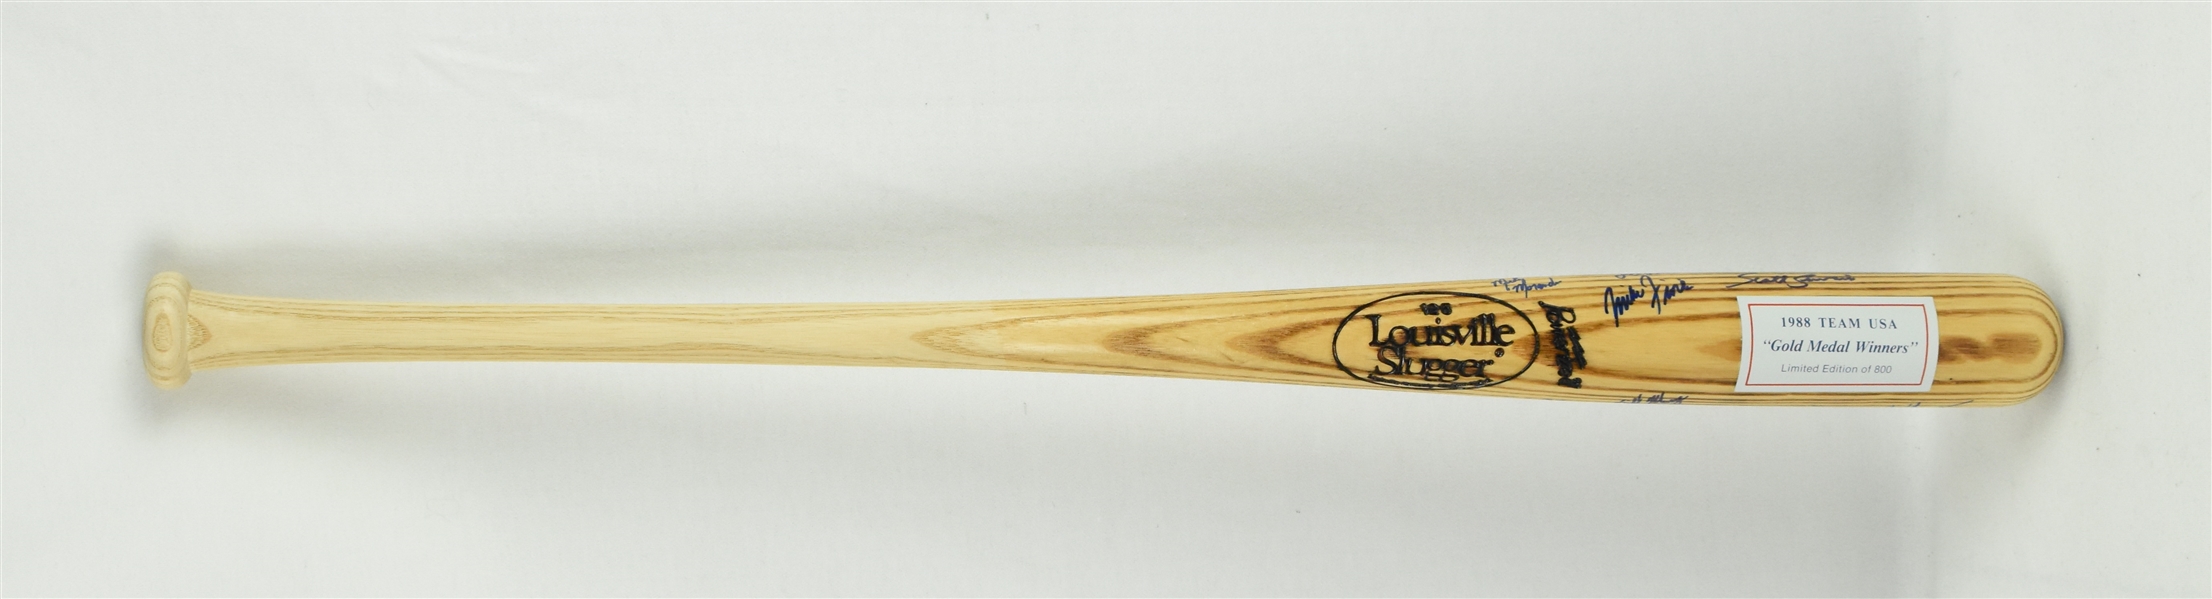 Team USA 1988 Gold Medal Winning Olympic Team Signed Limited Edition Bat 